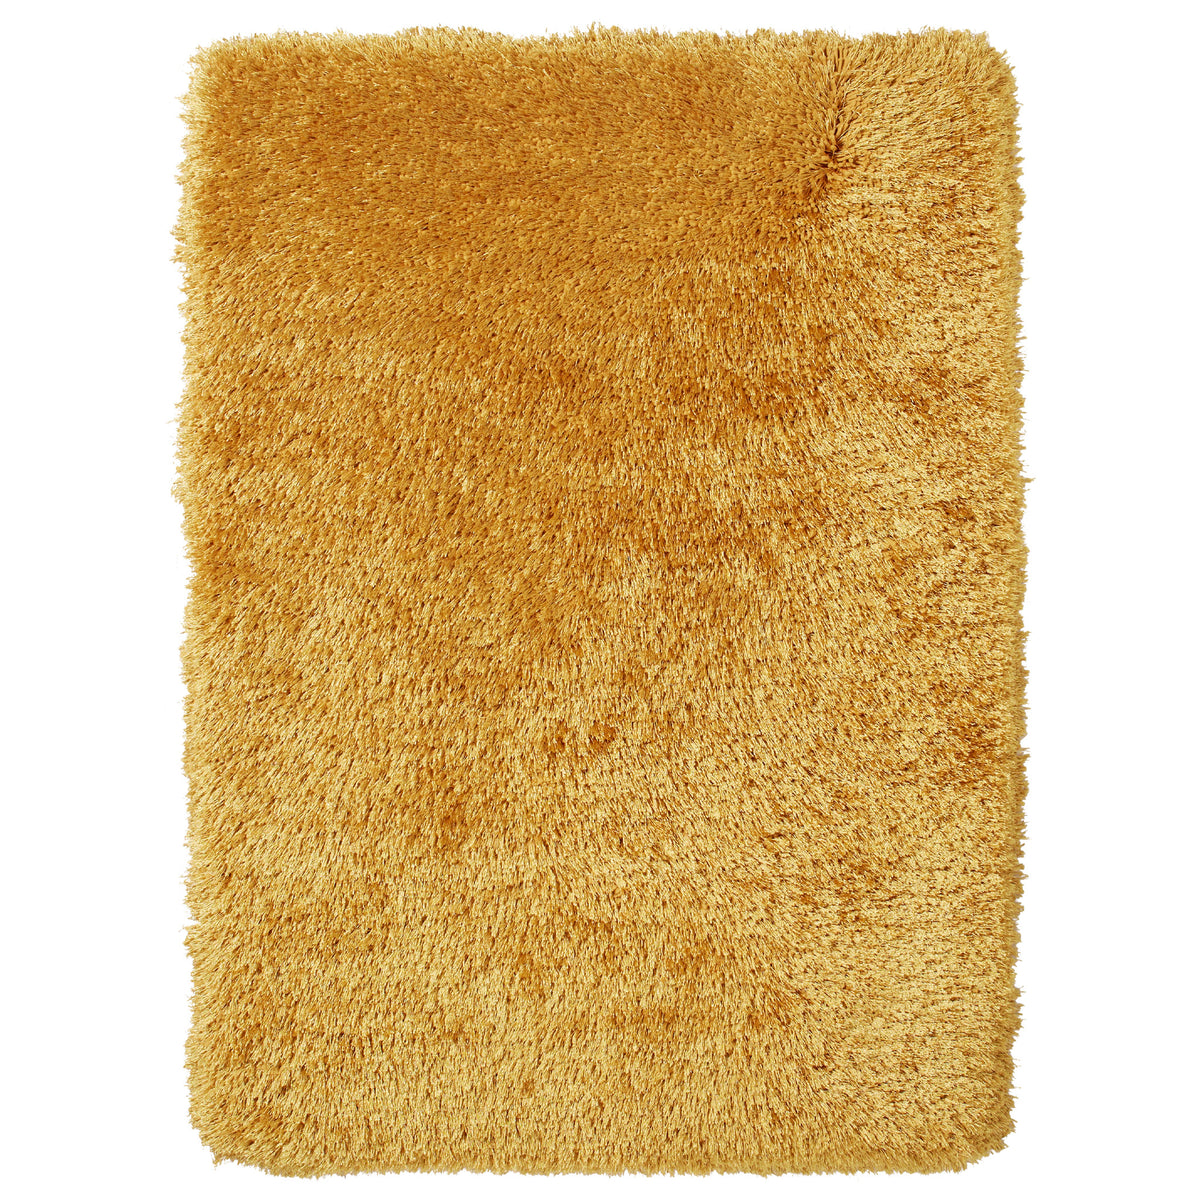 Newton Yellow Deluxe Shaggy Rug from Roseland Furniture